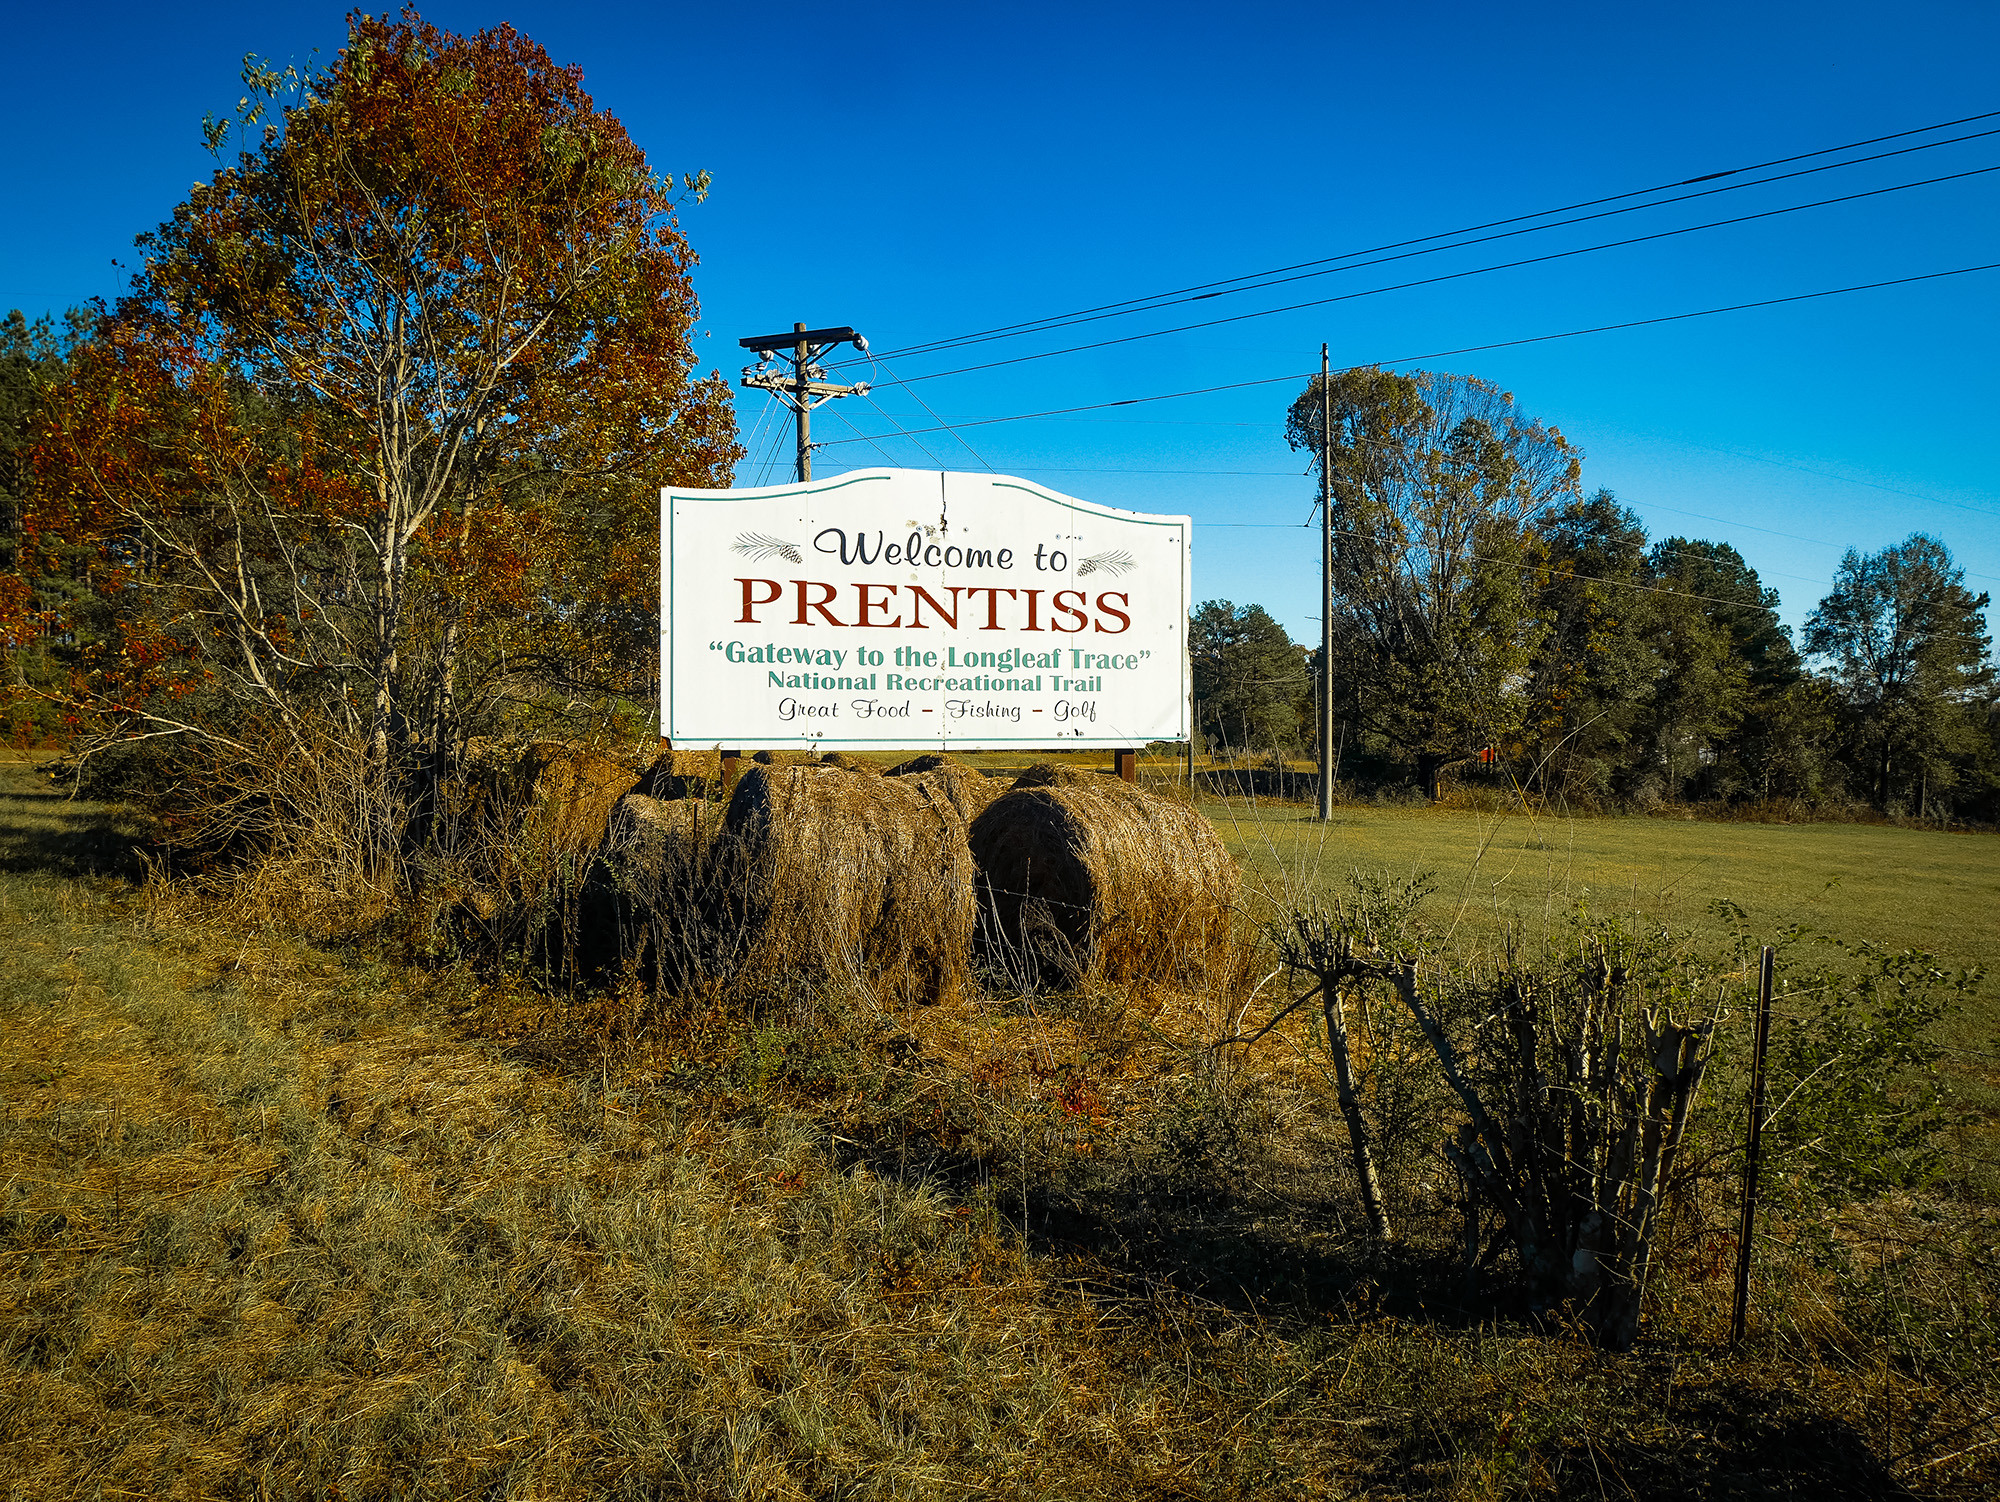 Welcome to Prentiss sign